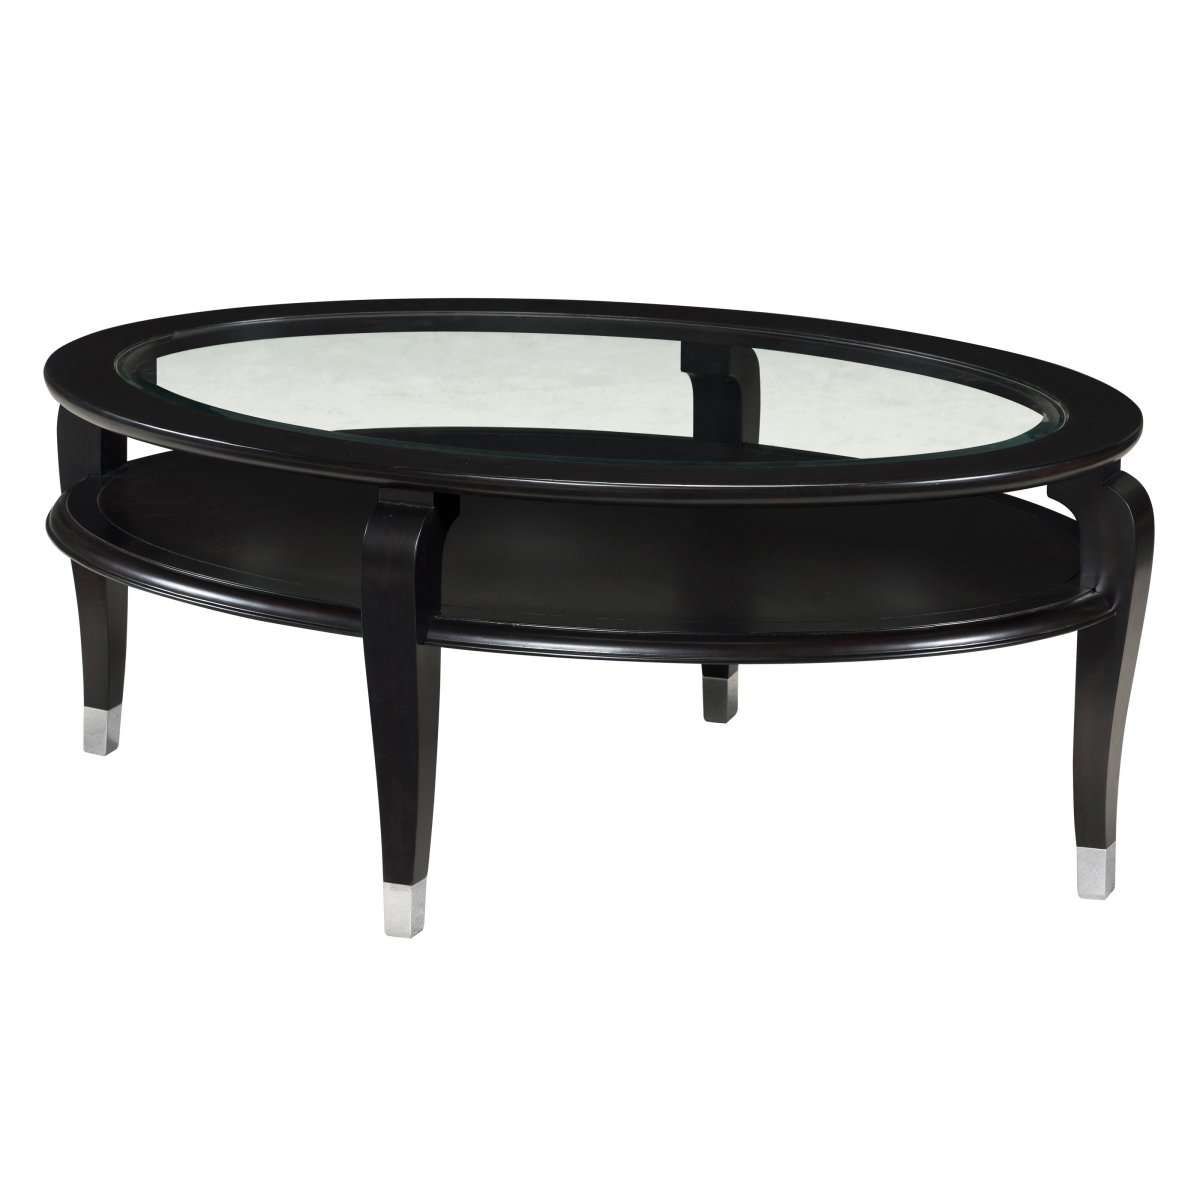 Image Black Oval Glass Coffee Table Modern Oval Glass Coffee Table Within Well Liked Black Oval Coffee Table (View 1 of 20)